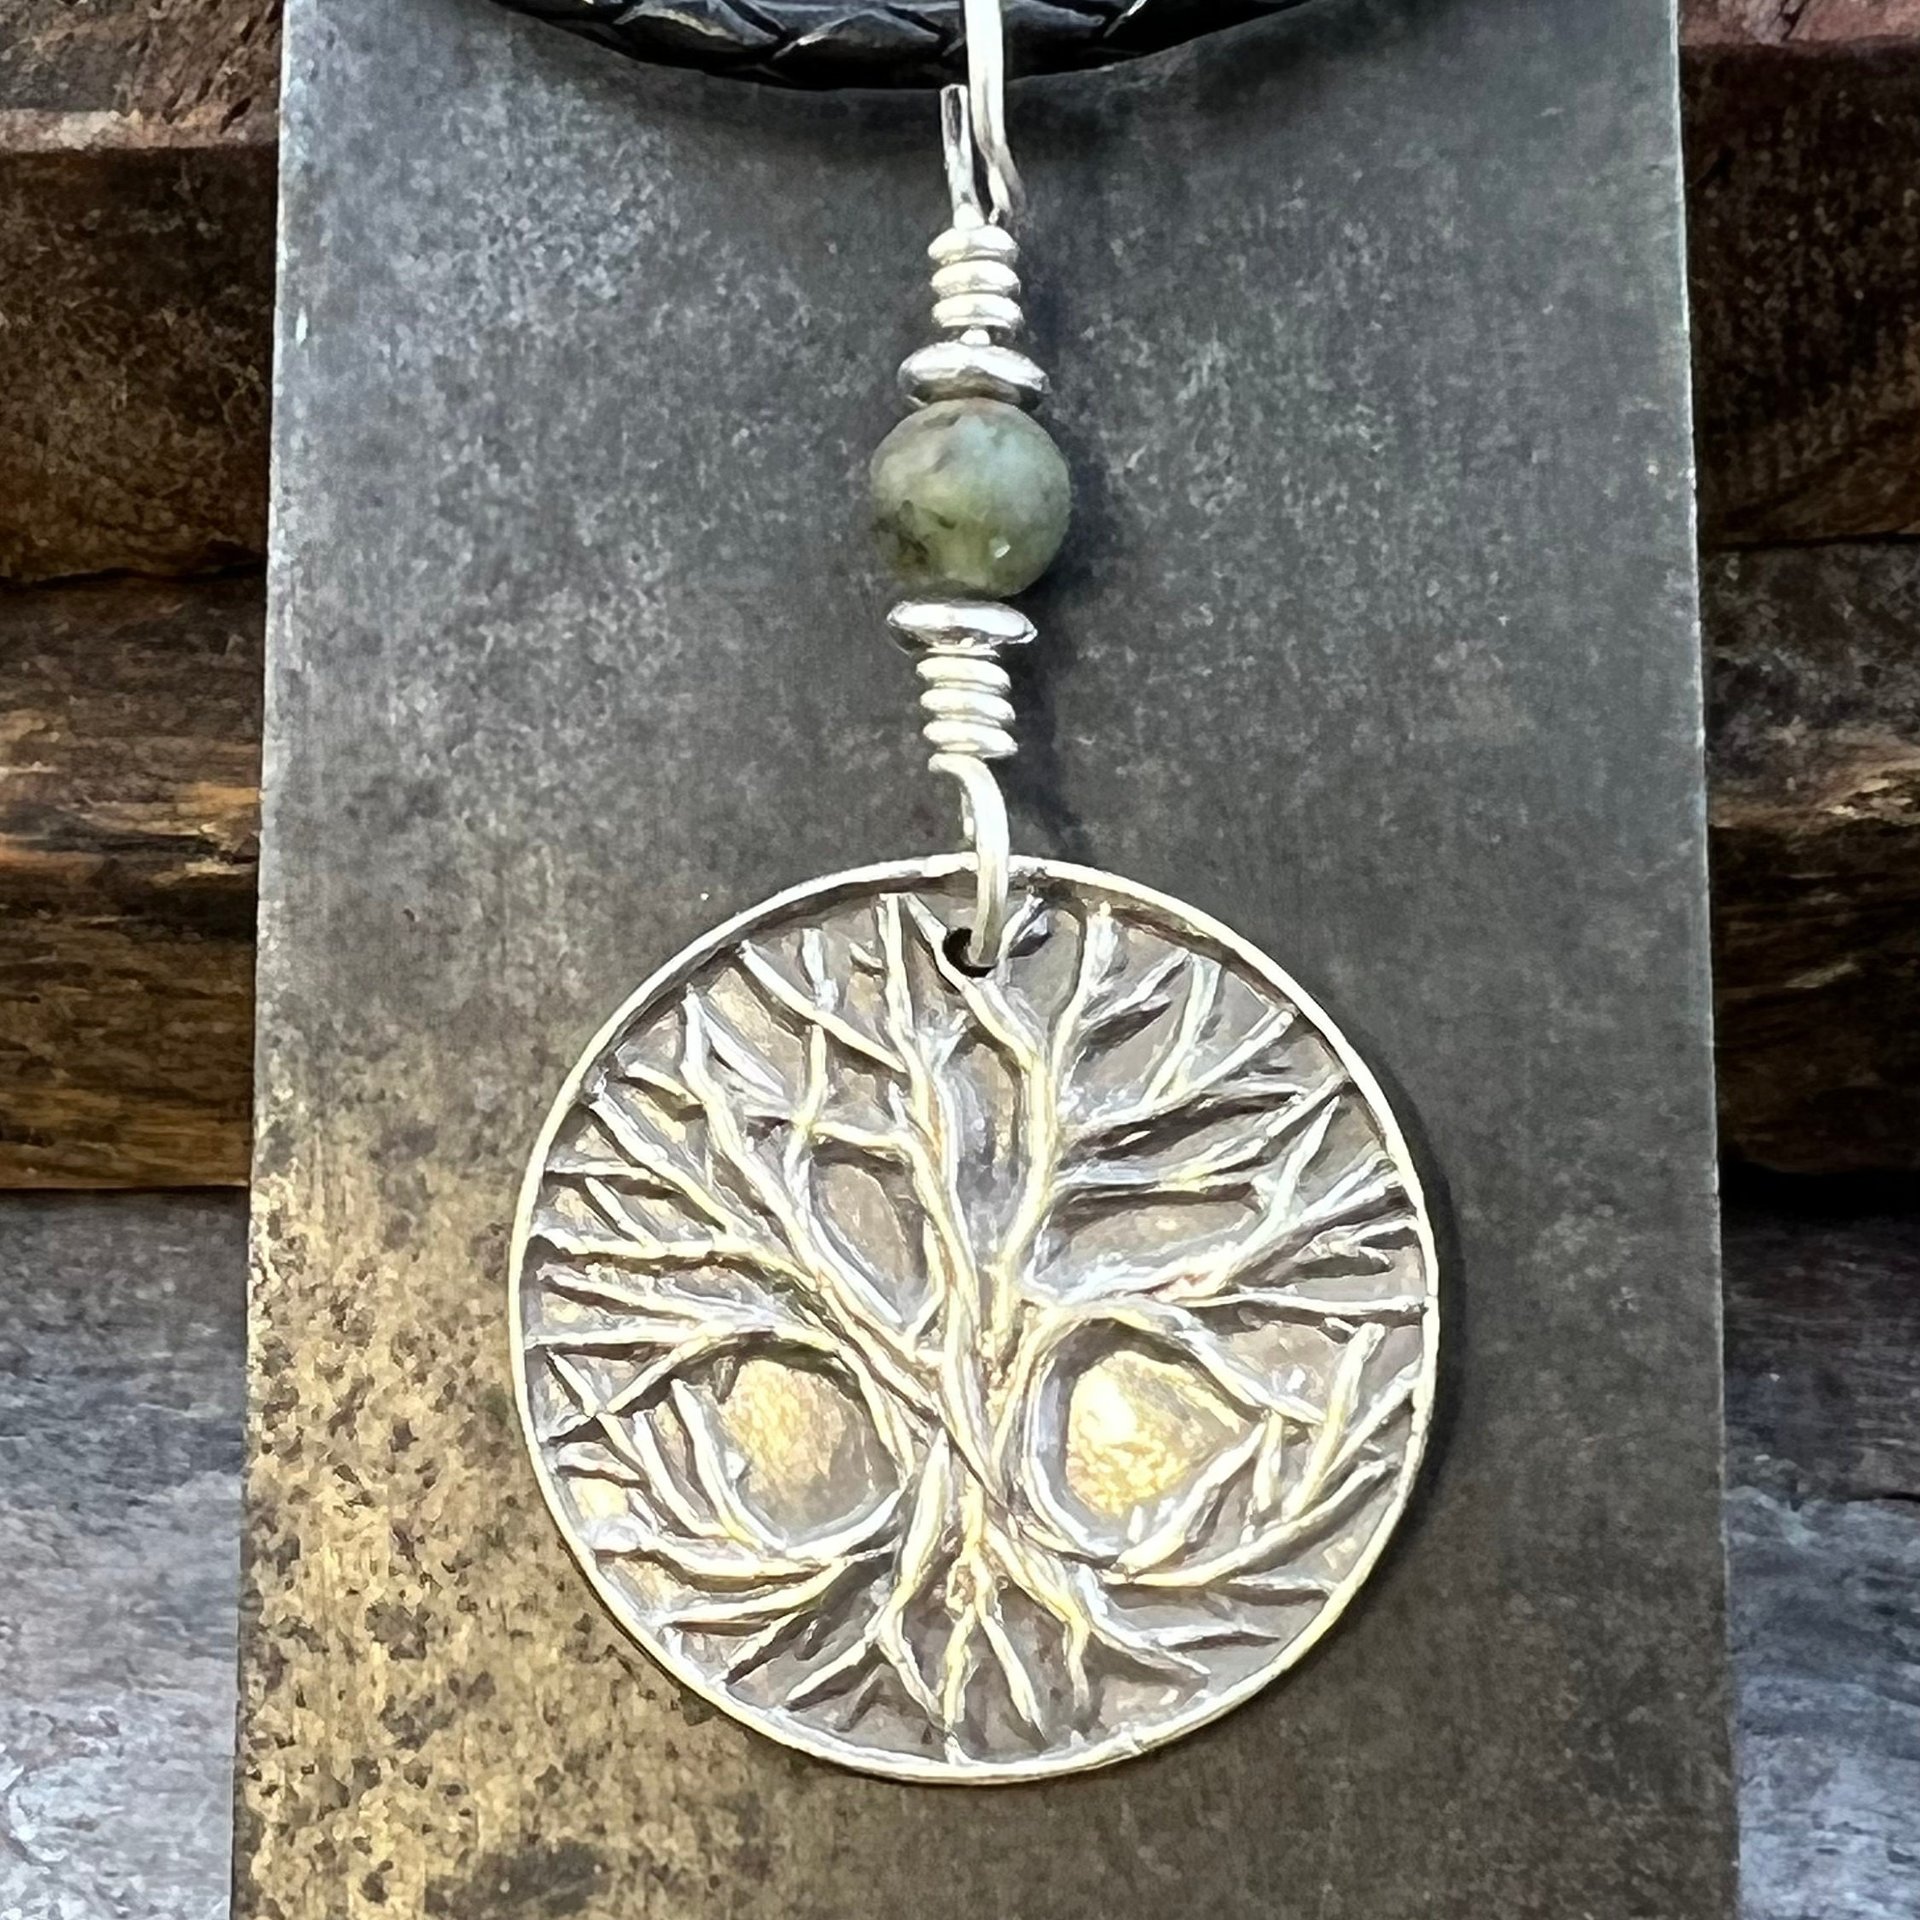 Celtic Tree of Life Pendant, Sterling Silver, Connemara Marble, Sacred Celtic Trees, Irish Celtic Spirals, Druid Dryad, Crann Bethadh, Witch